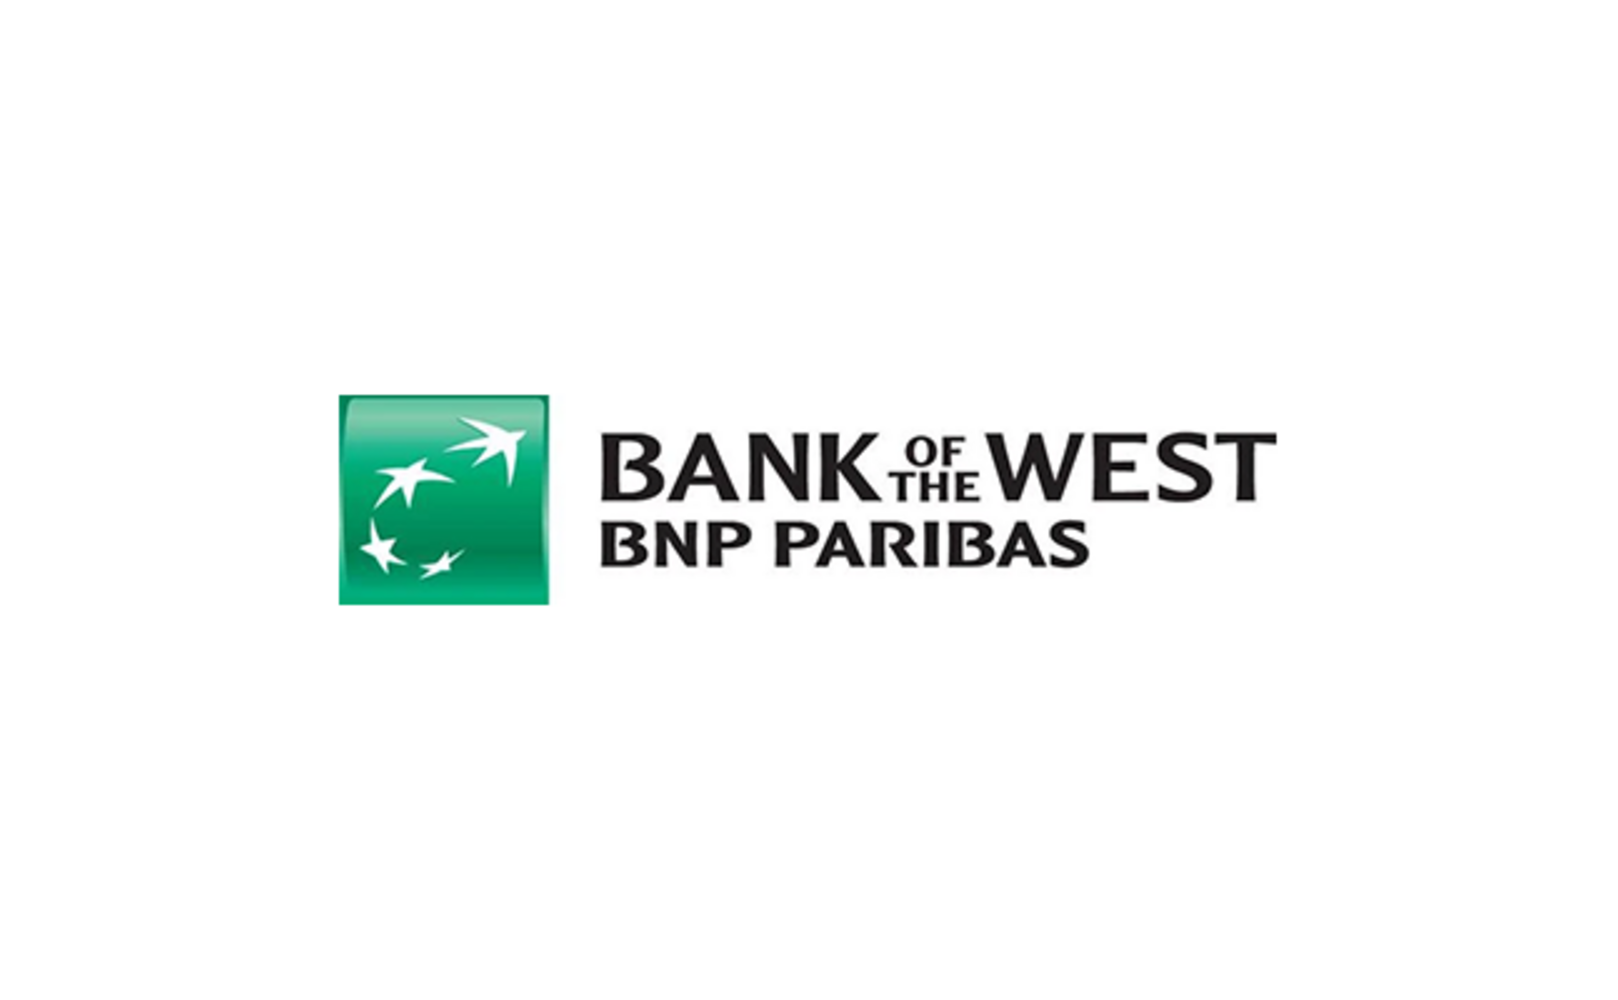 Bank of the West Logo